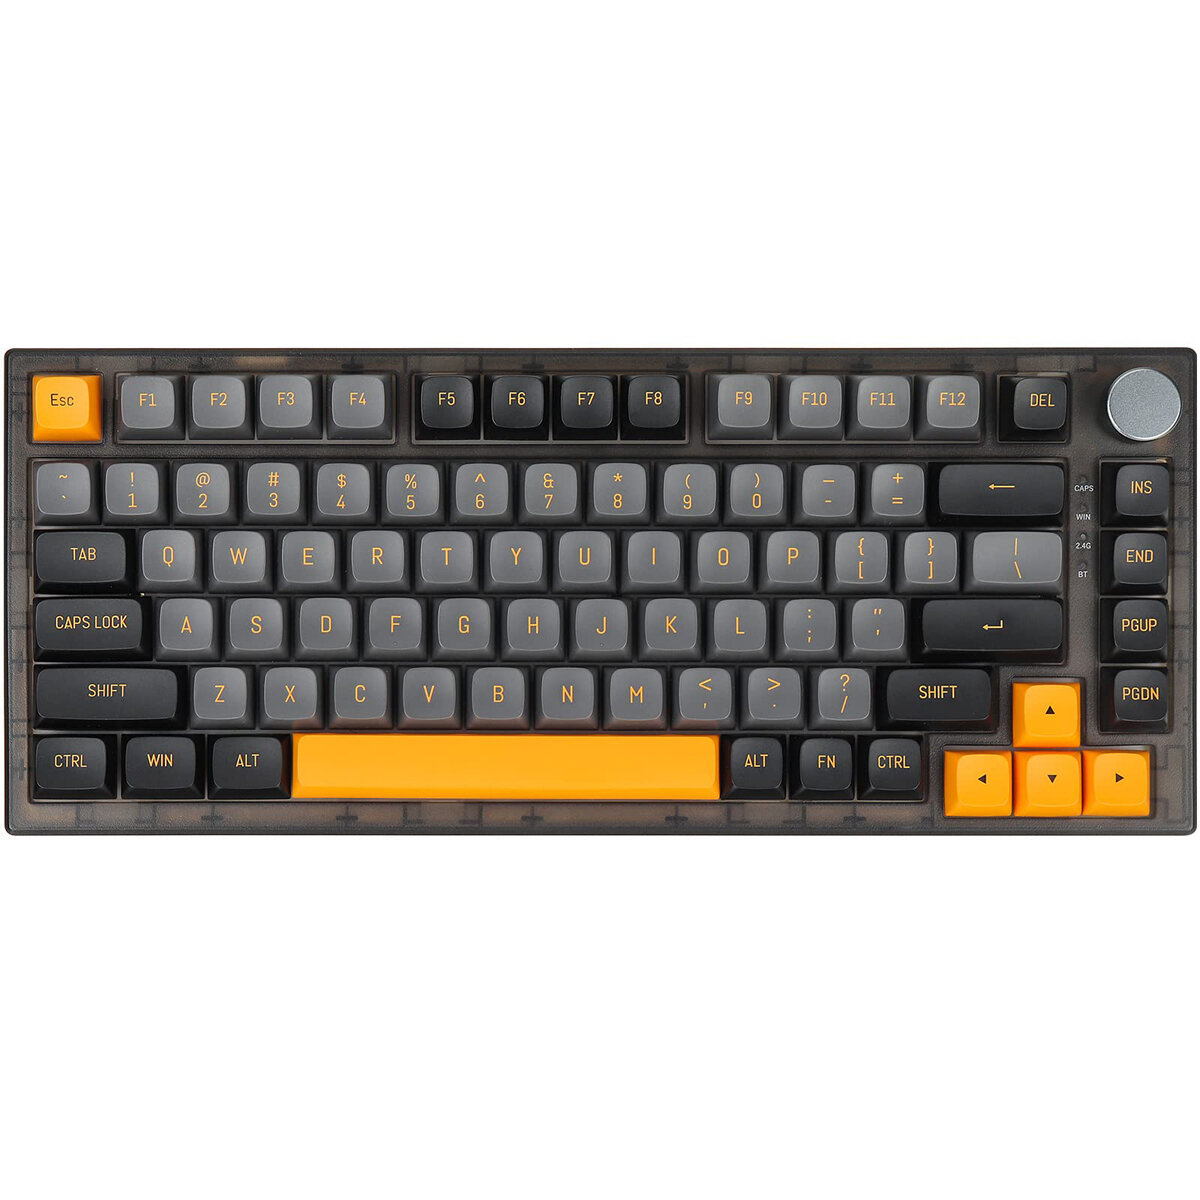 FEKER IK75 Ultra Triple Mode Mechanical Keyboard 82 Keys Black Case RGB Backlit with Multifunction Knob bluetooth/ 2.4GHz/ USB Wired Triple Modes Double Shot PBT Keycaps CSA Profile Hot-Swappable Switch for Mac Windows